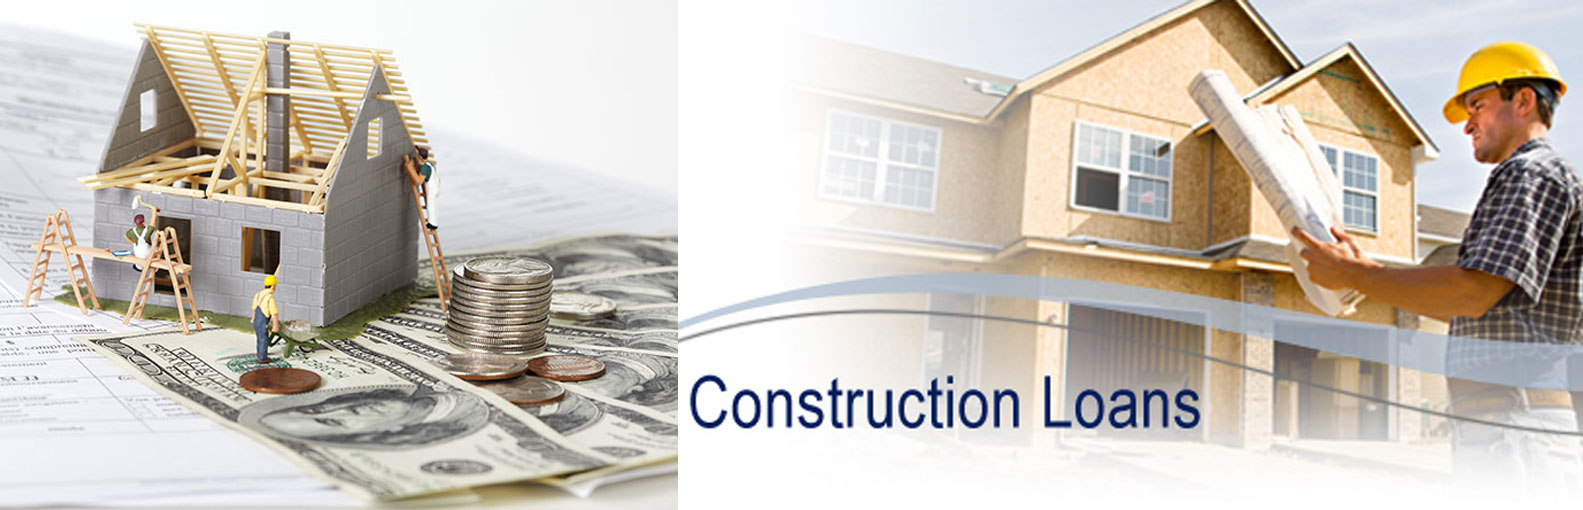  New Indian Finance Co.’s offers Home Construction Loans